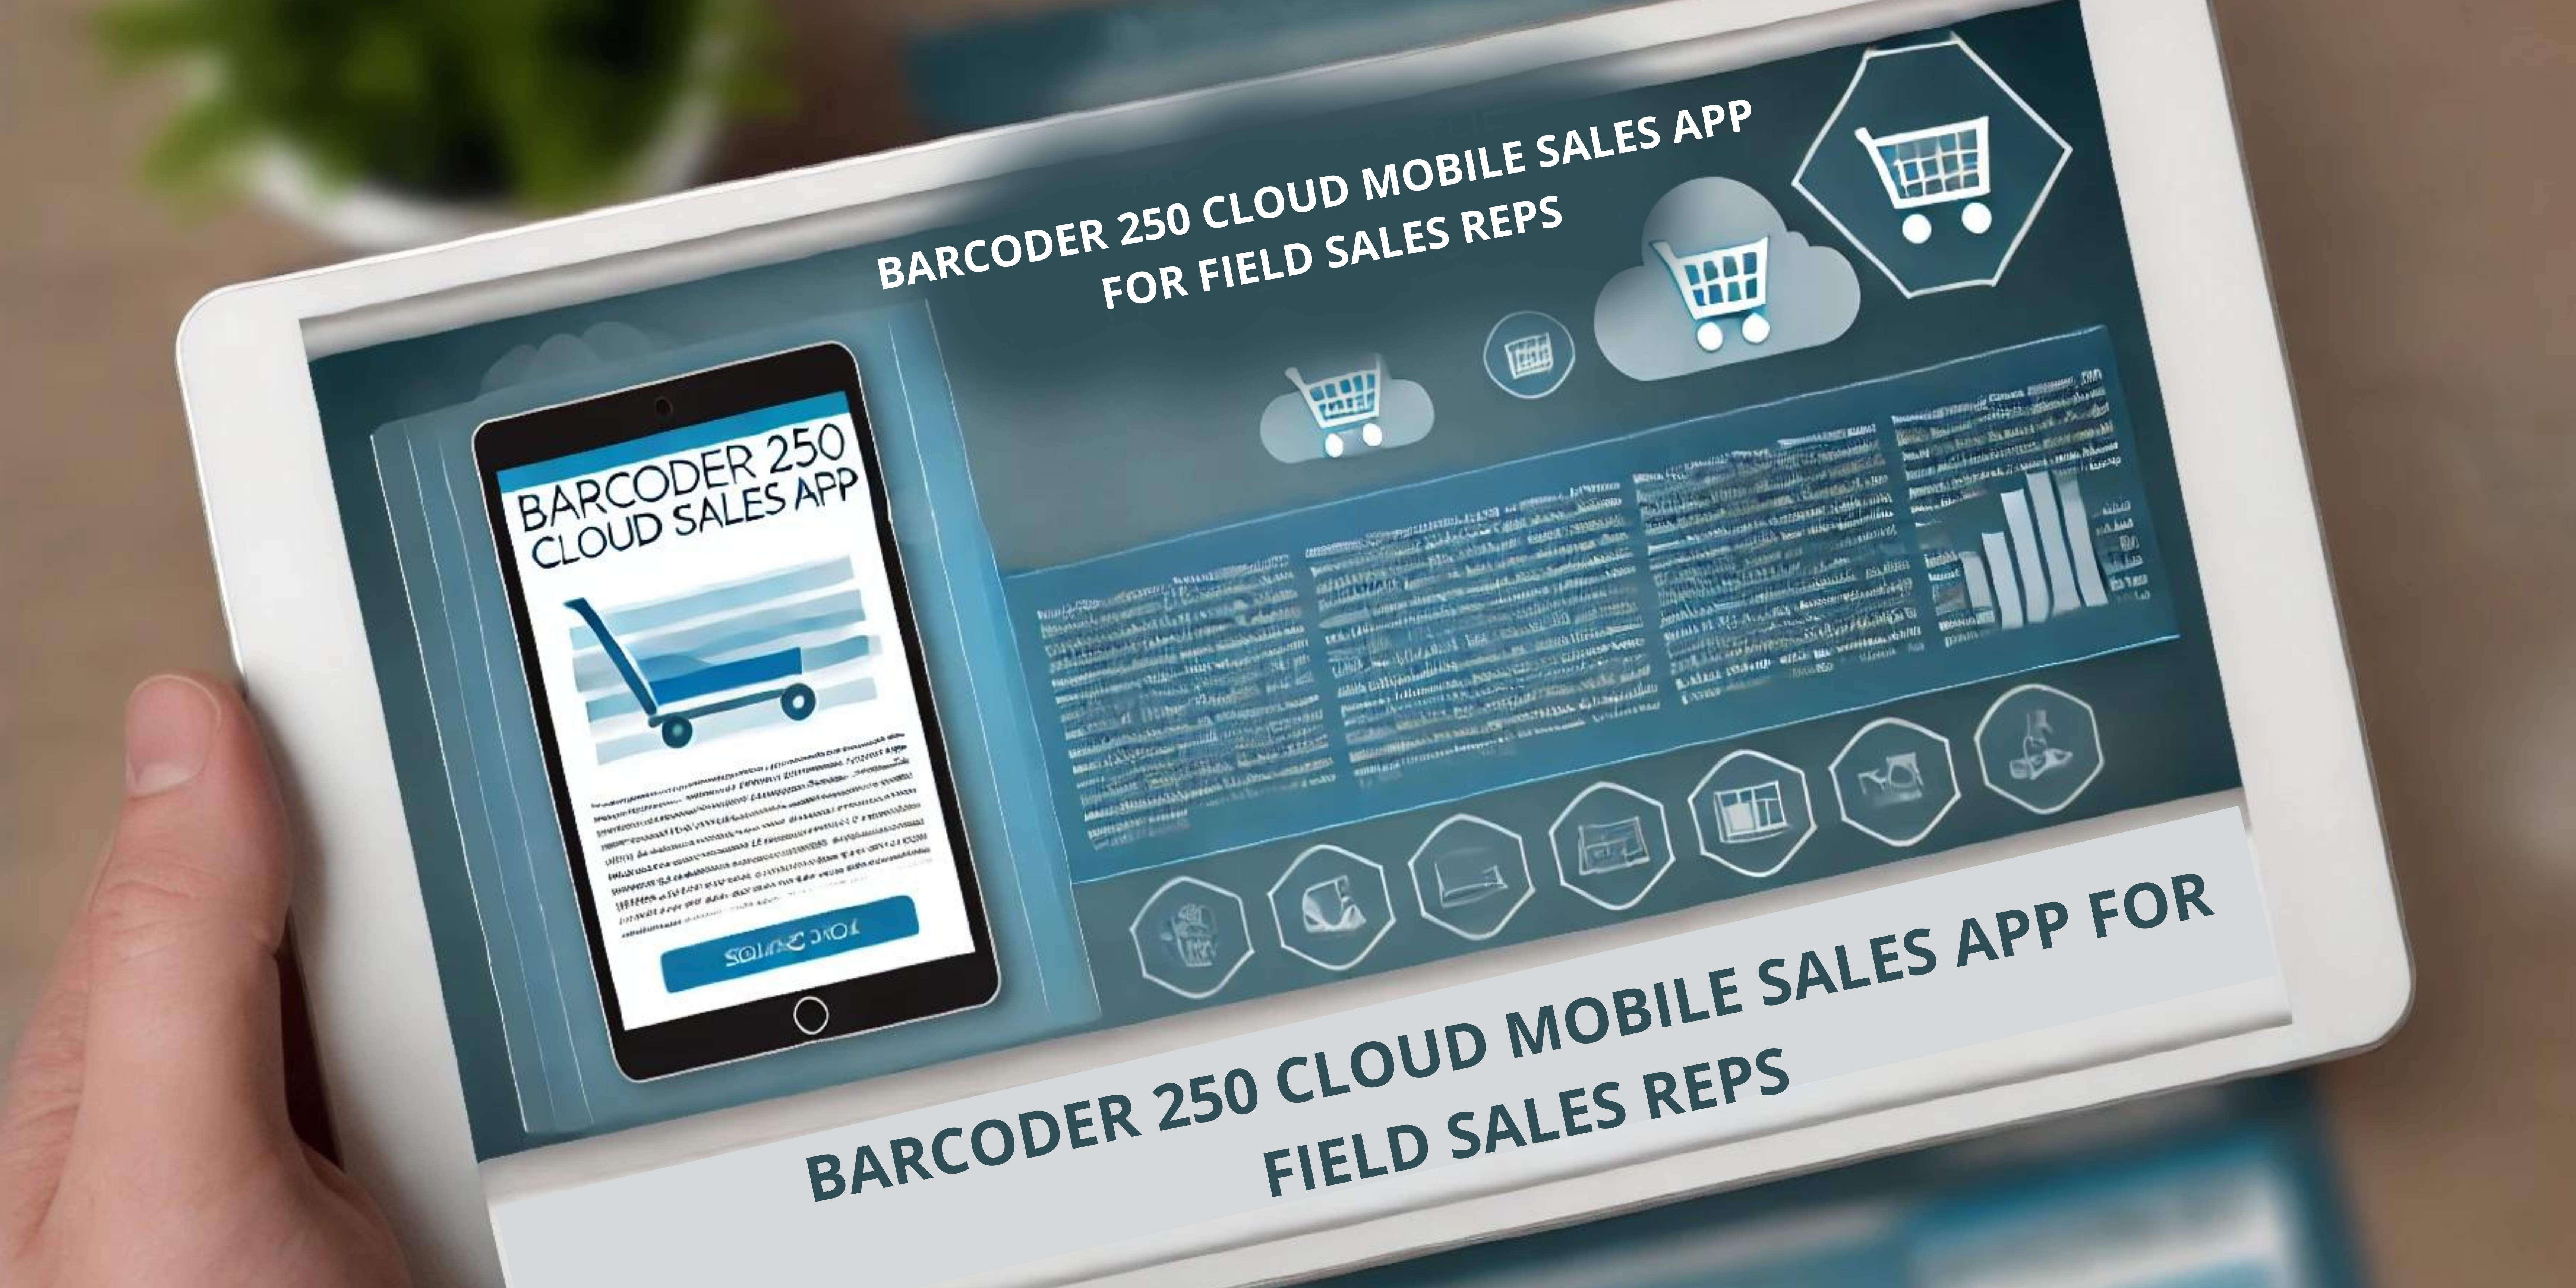 Barcoder 250 Cloud Mobile Sales App for sales reps